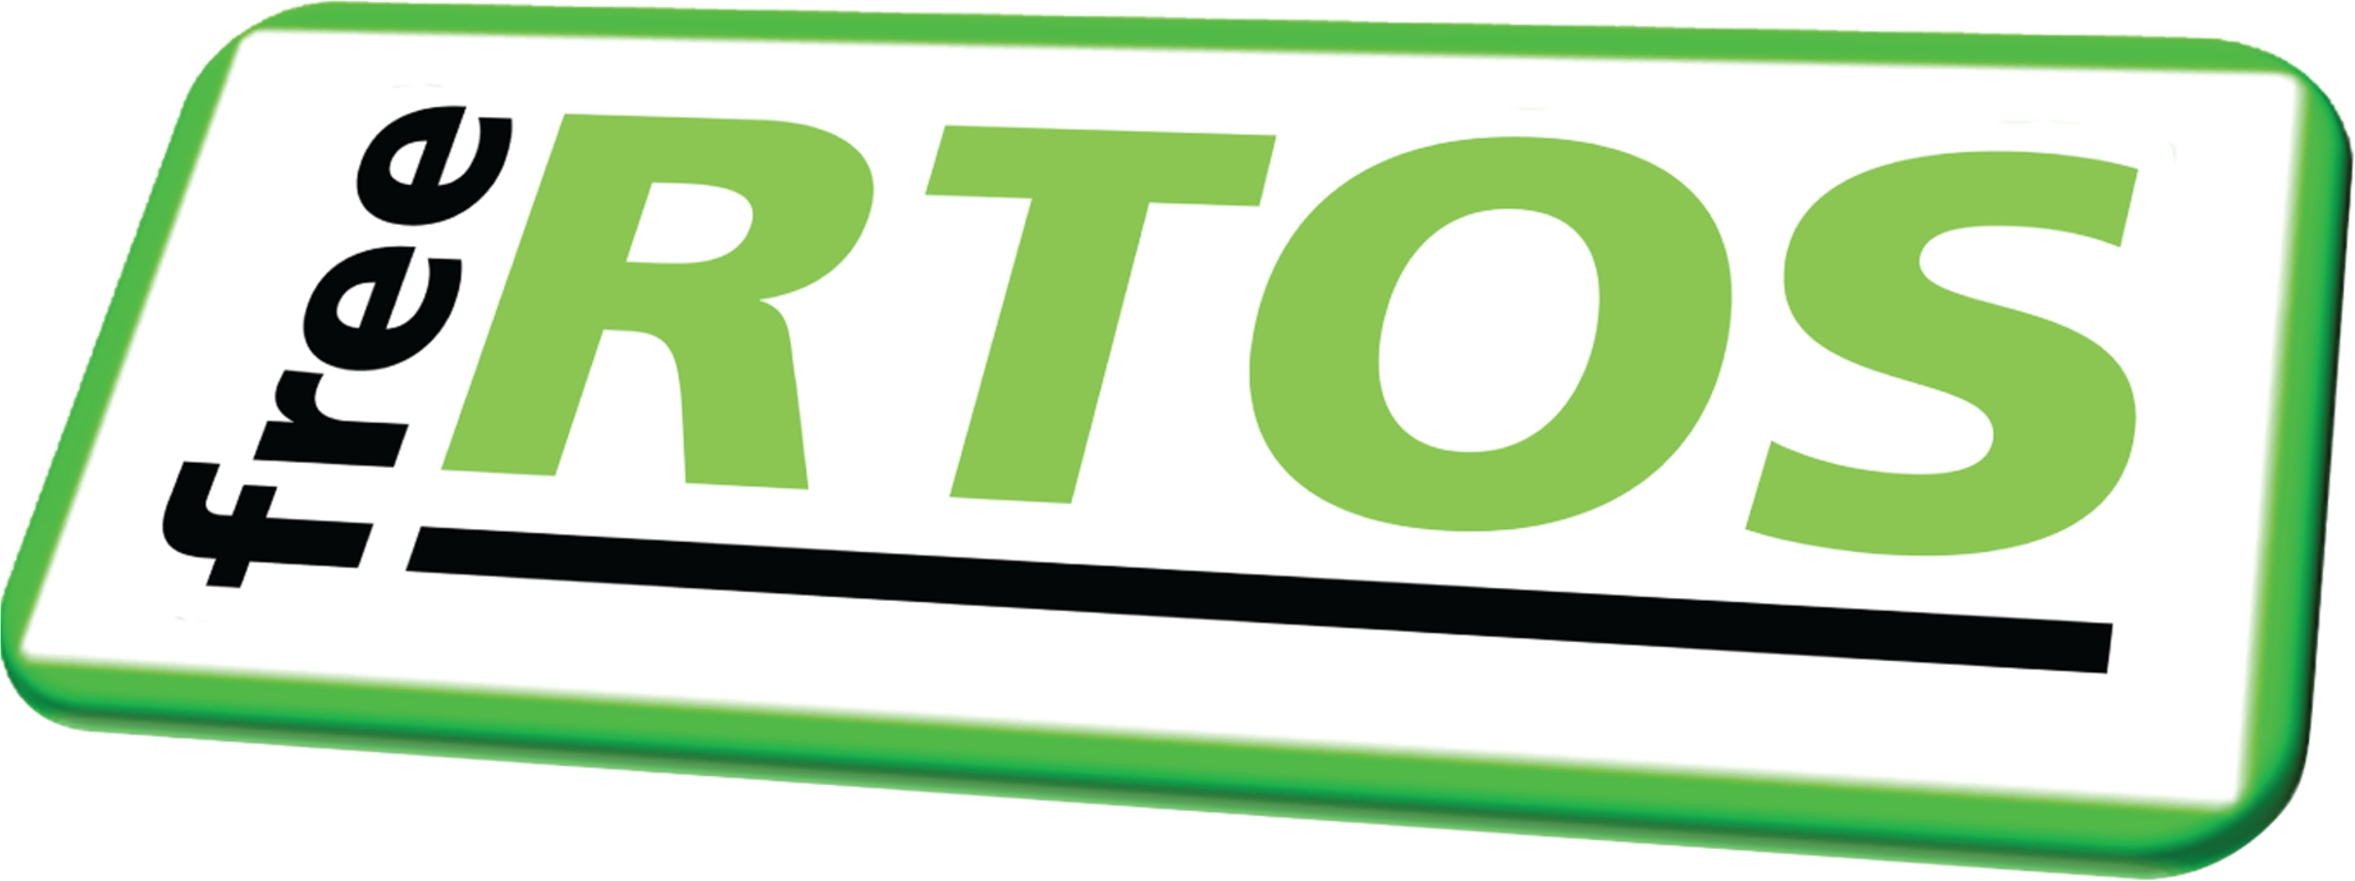 The FreeRTOS logo. Image from http://www.arm.com/community/partners/display_product/rw/ProductId/4028/.